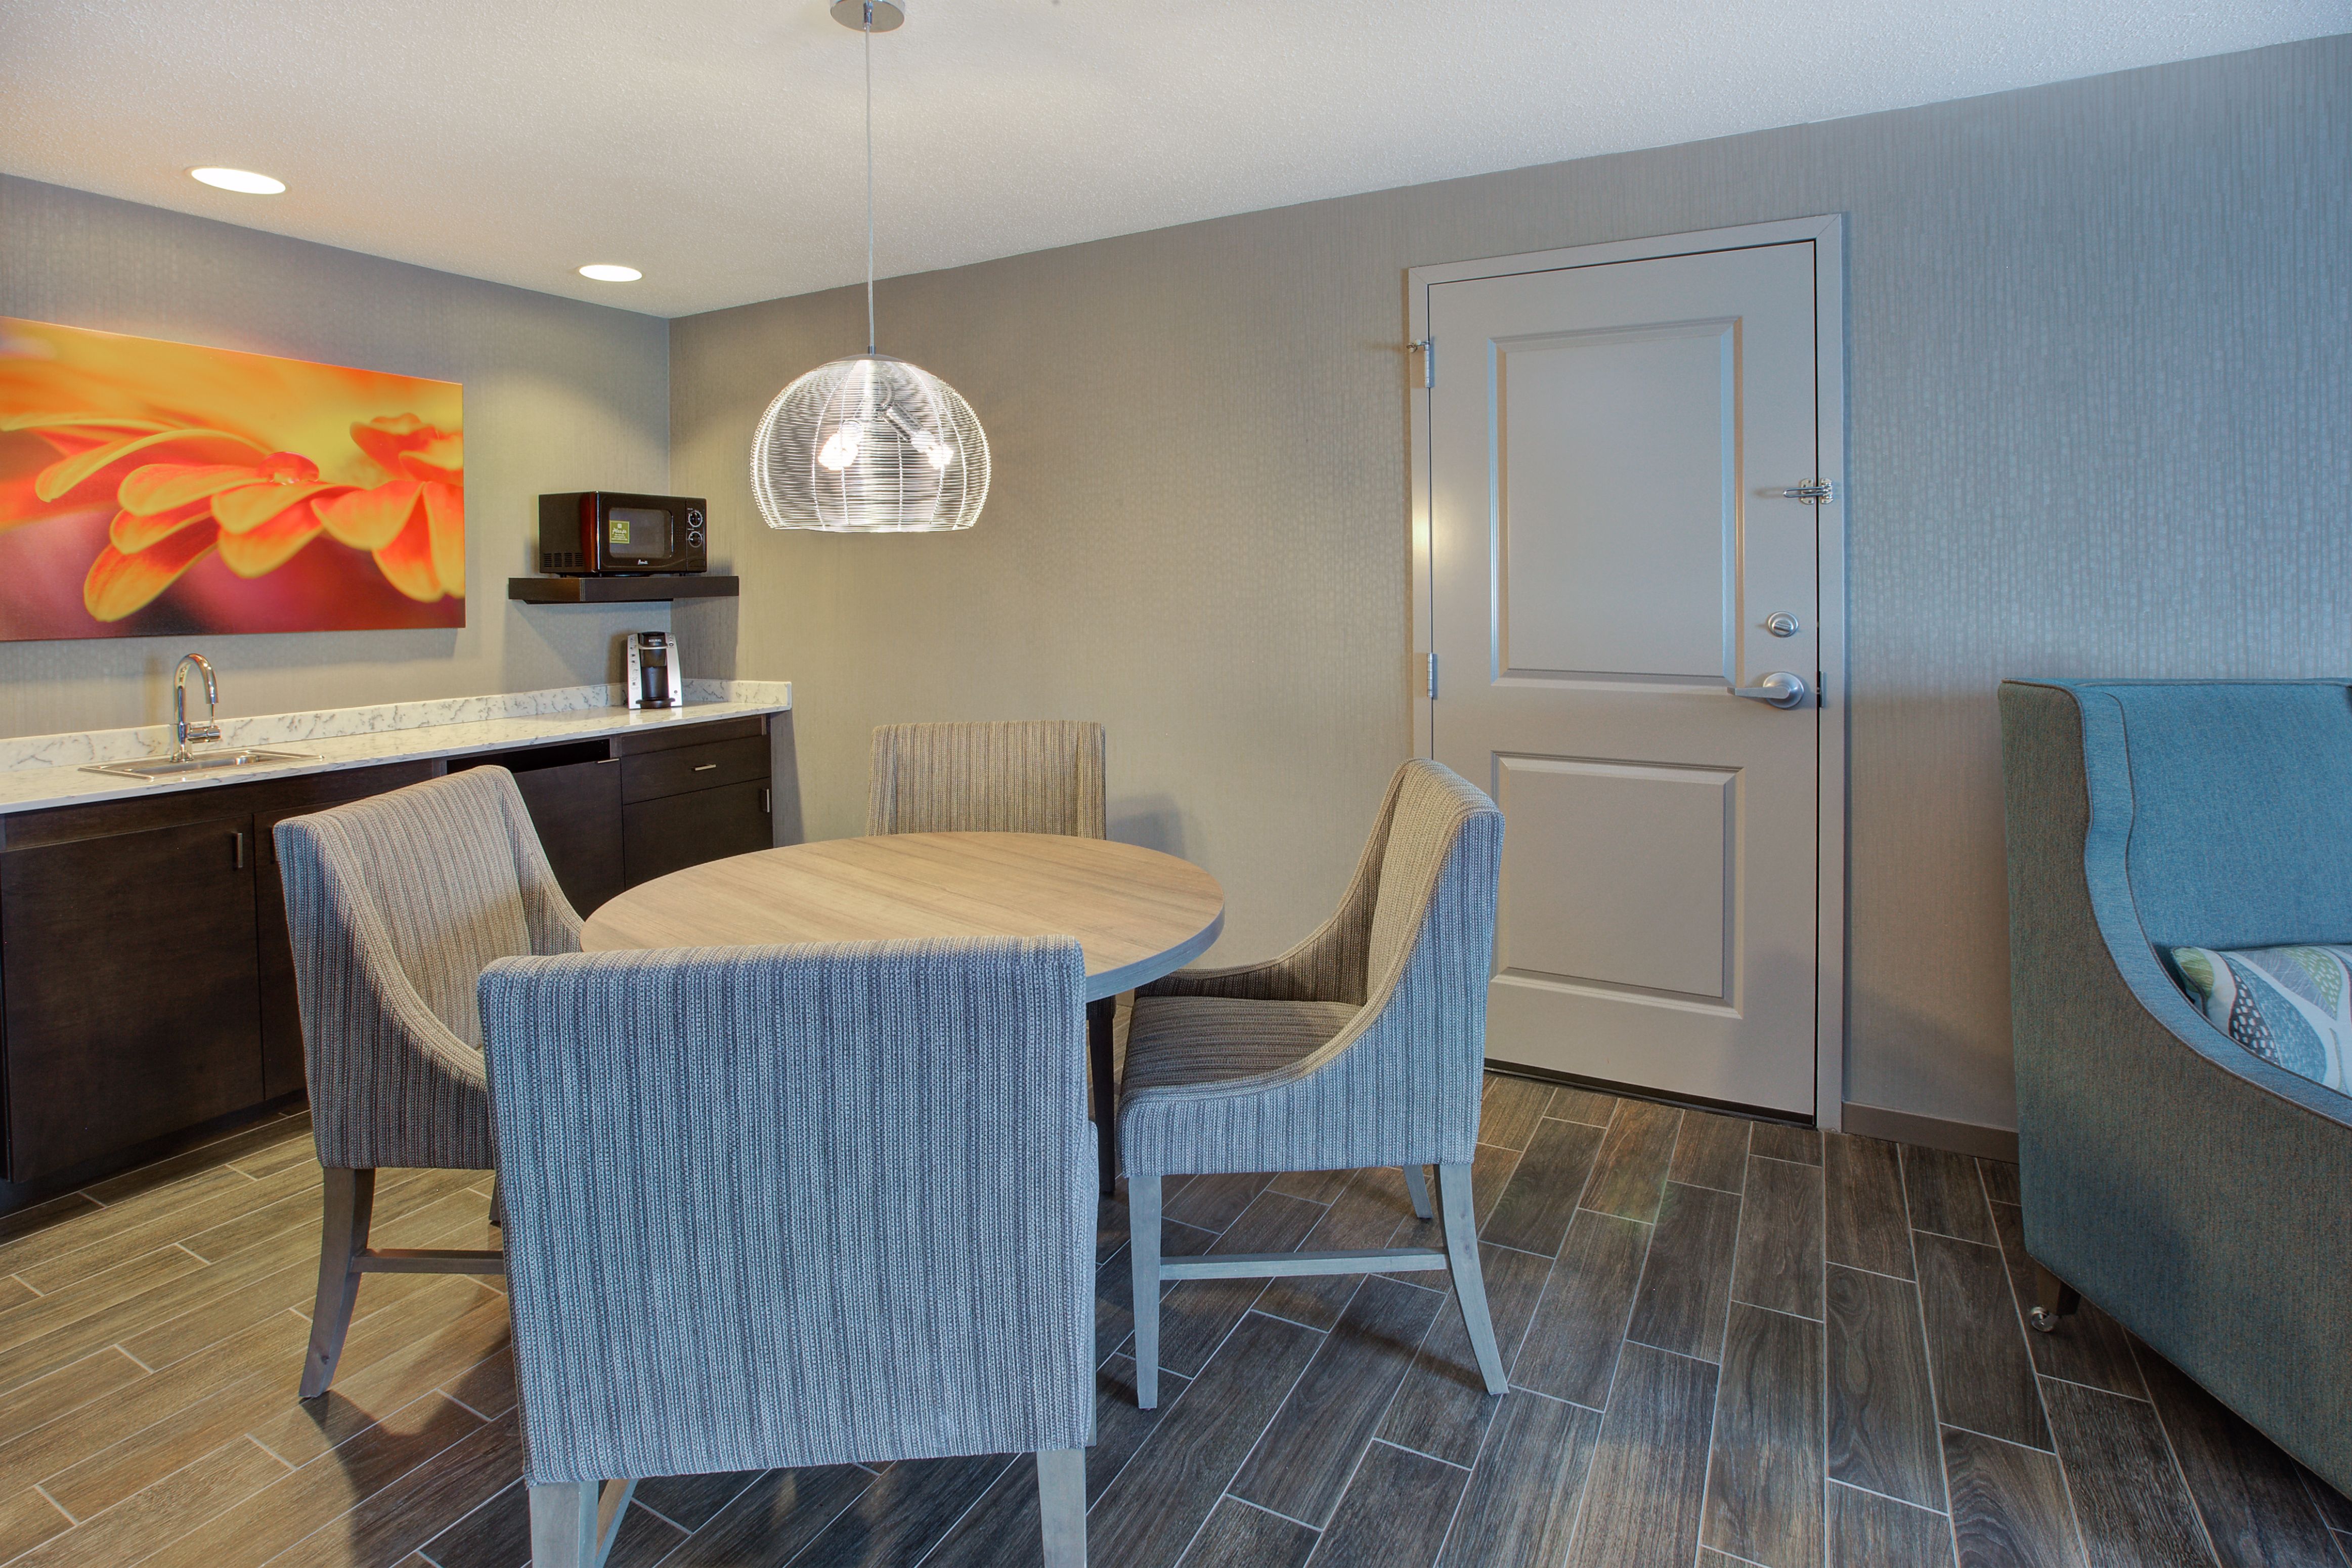 Executive suite dining area with dining table, chairs, microwave, coffee maker, and room entrance